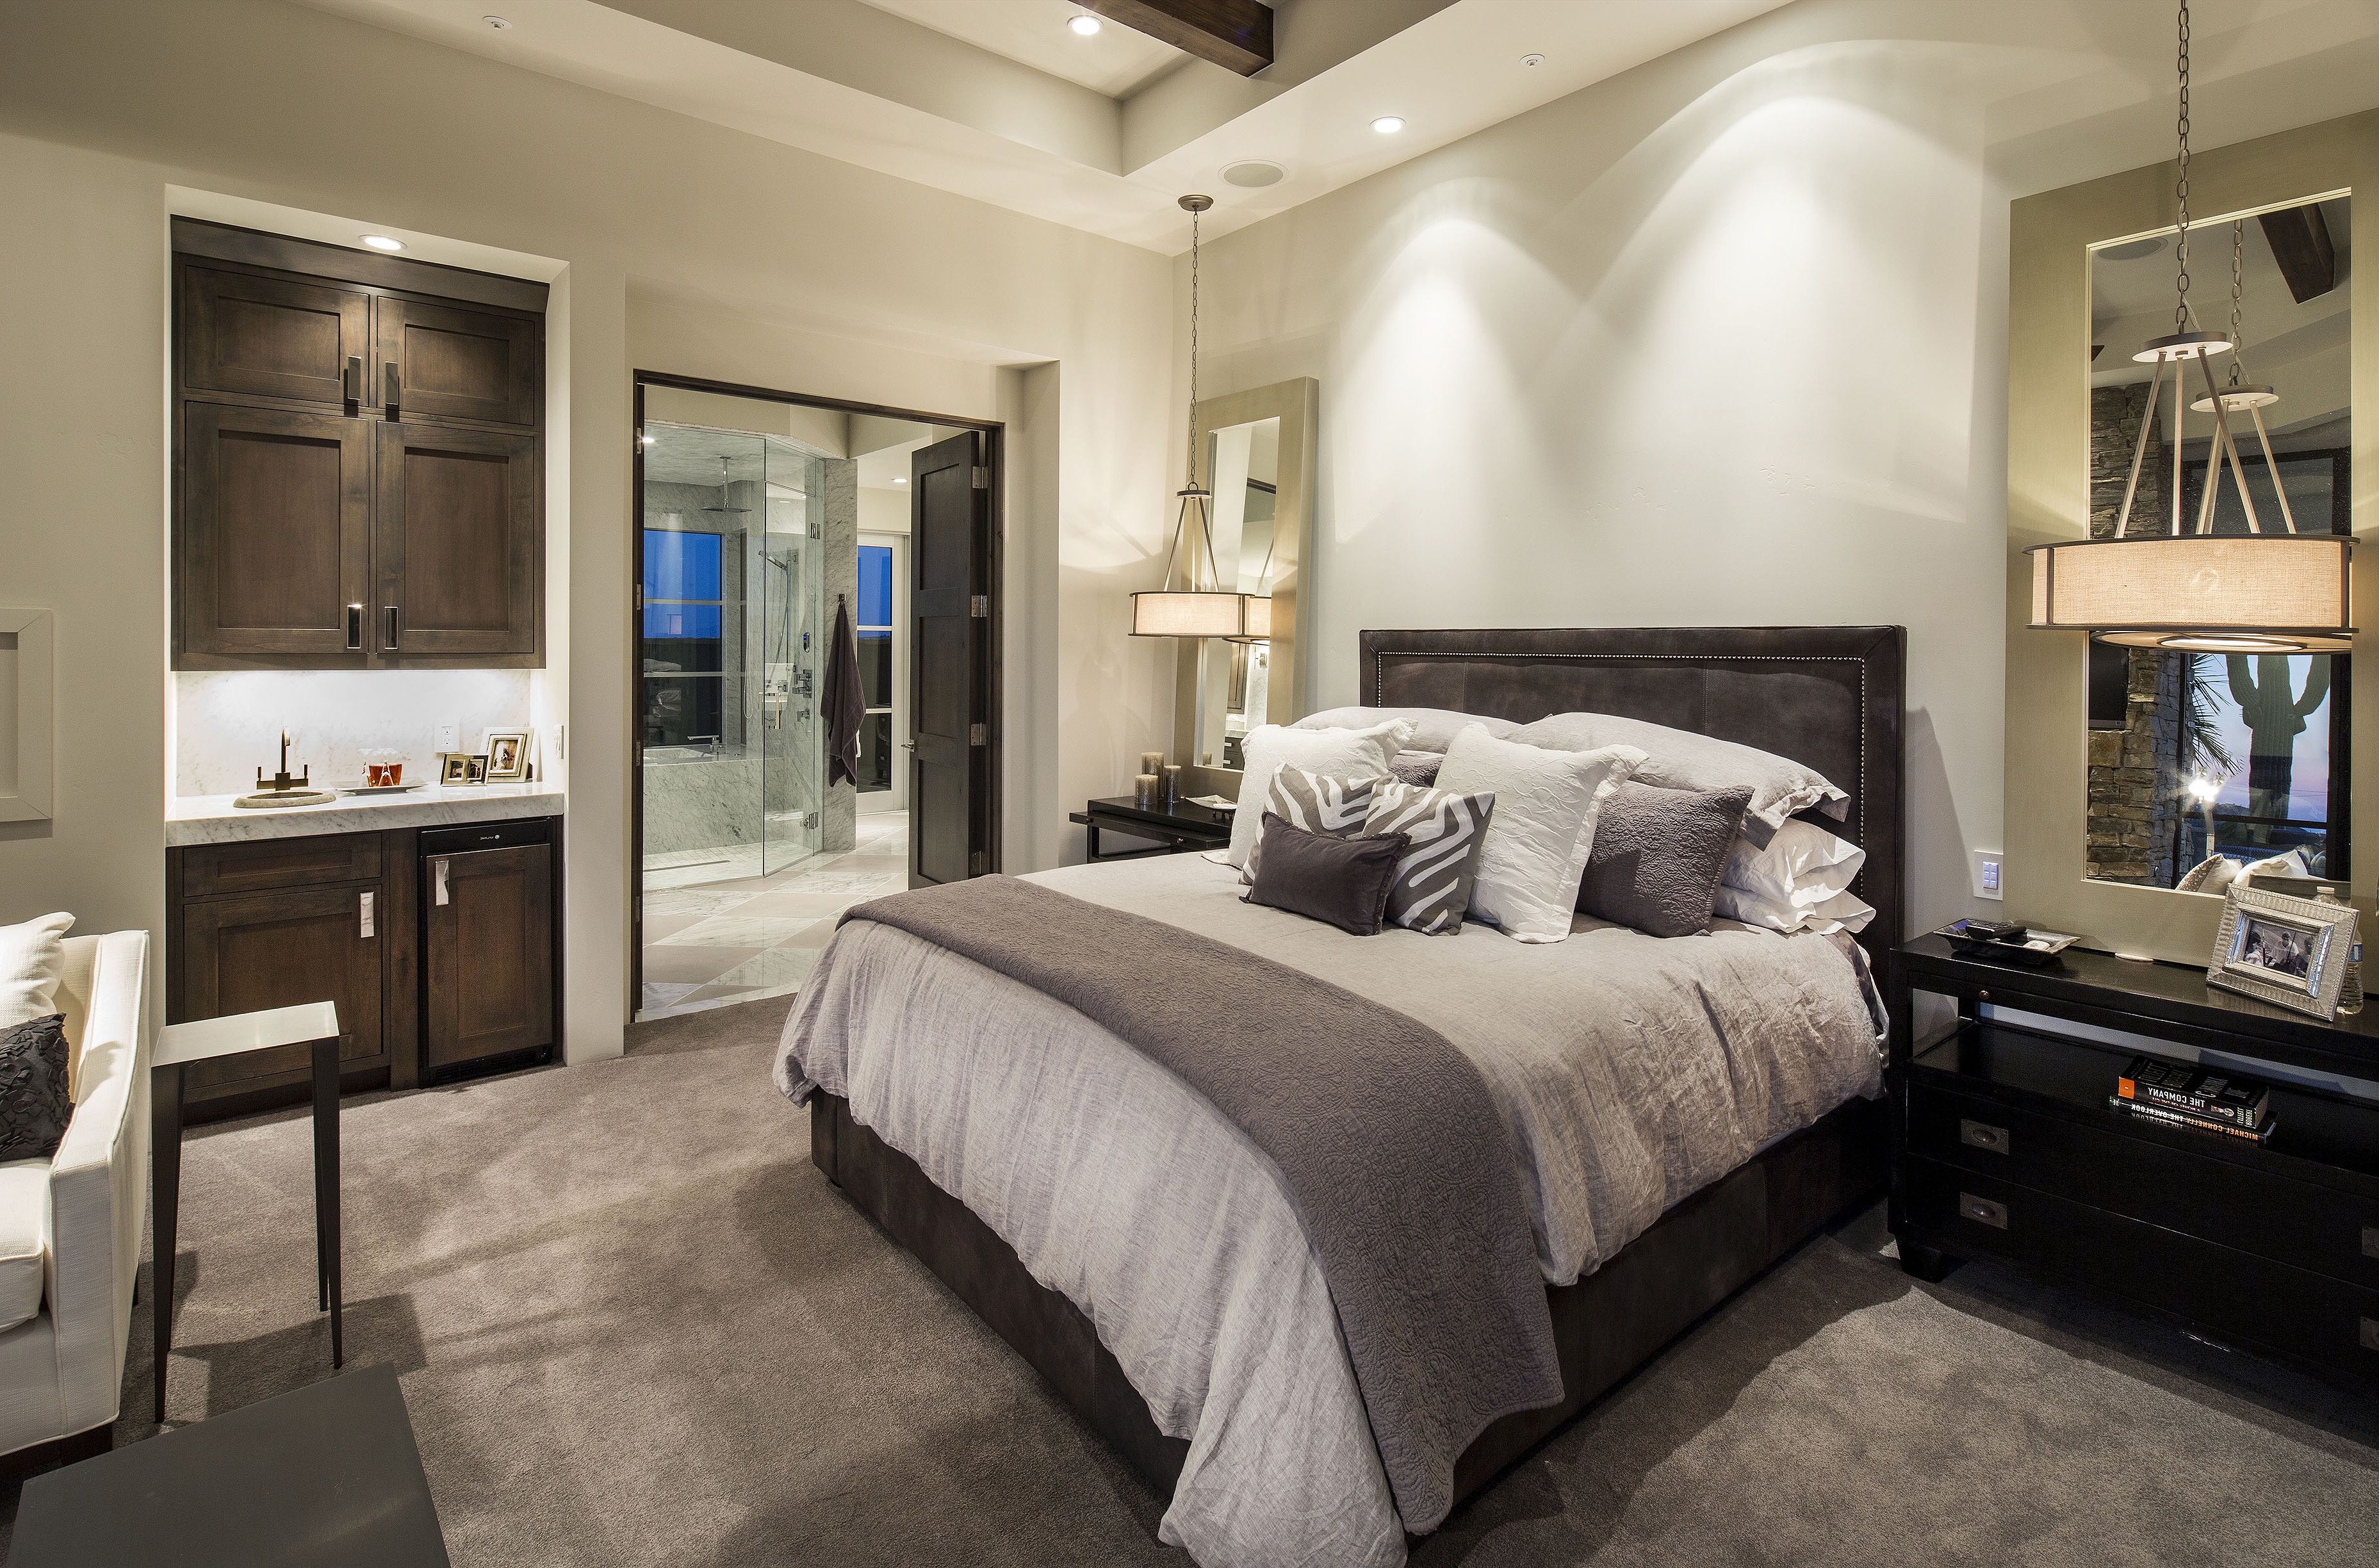 Modern Bedroom With Built In Mini Bar (View 15 of 23)